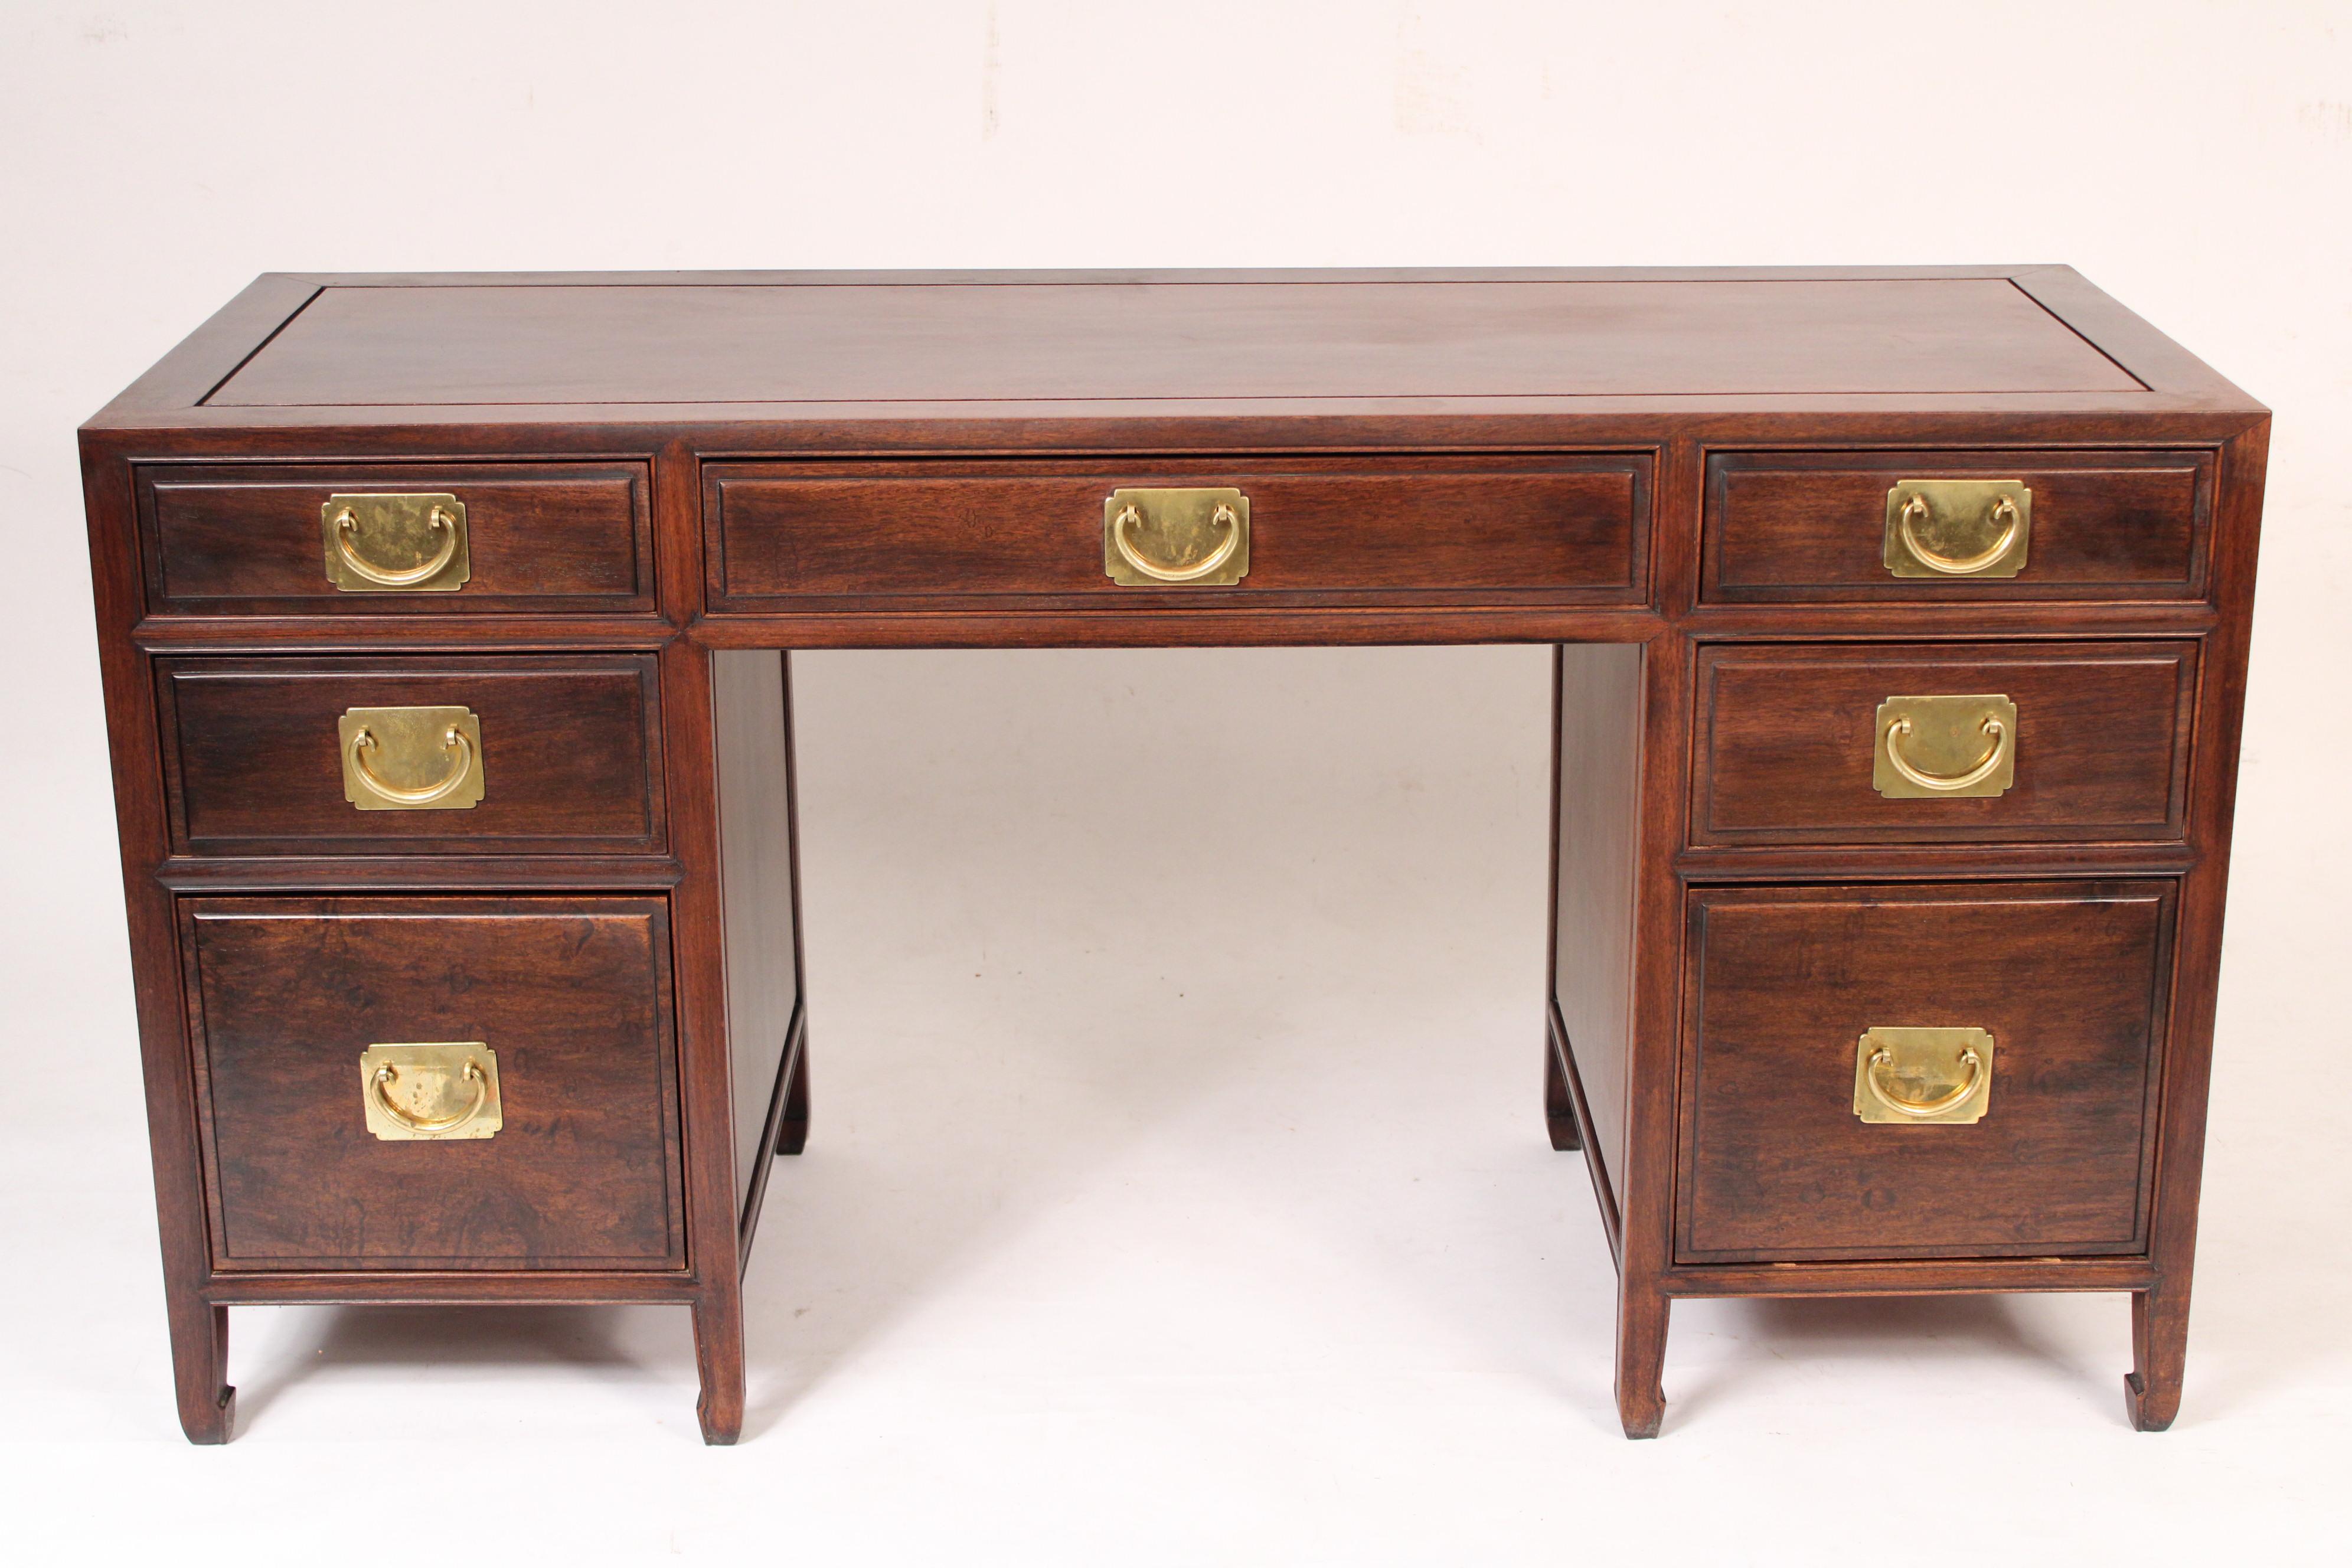 Chinese teak wood double pedestal desk, circa 1960's. With a rectangular top, 3 frieze drawers over two pedestals, left pedestal with two drawers the bottom drawers interior measurement is, height 11